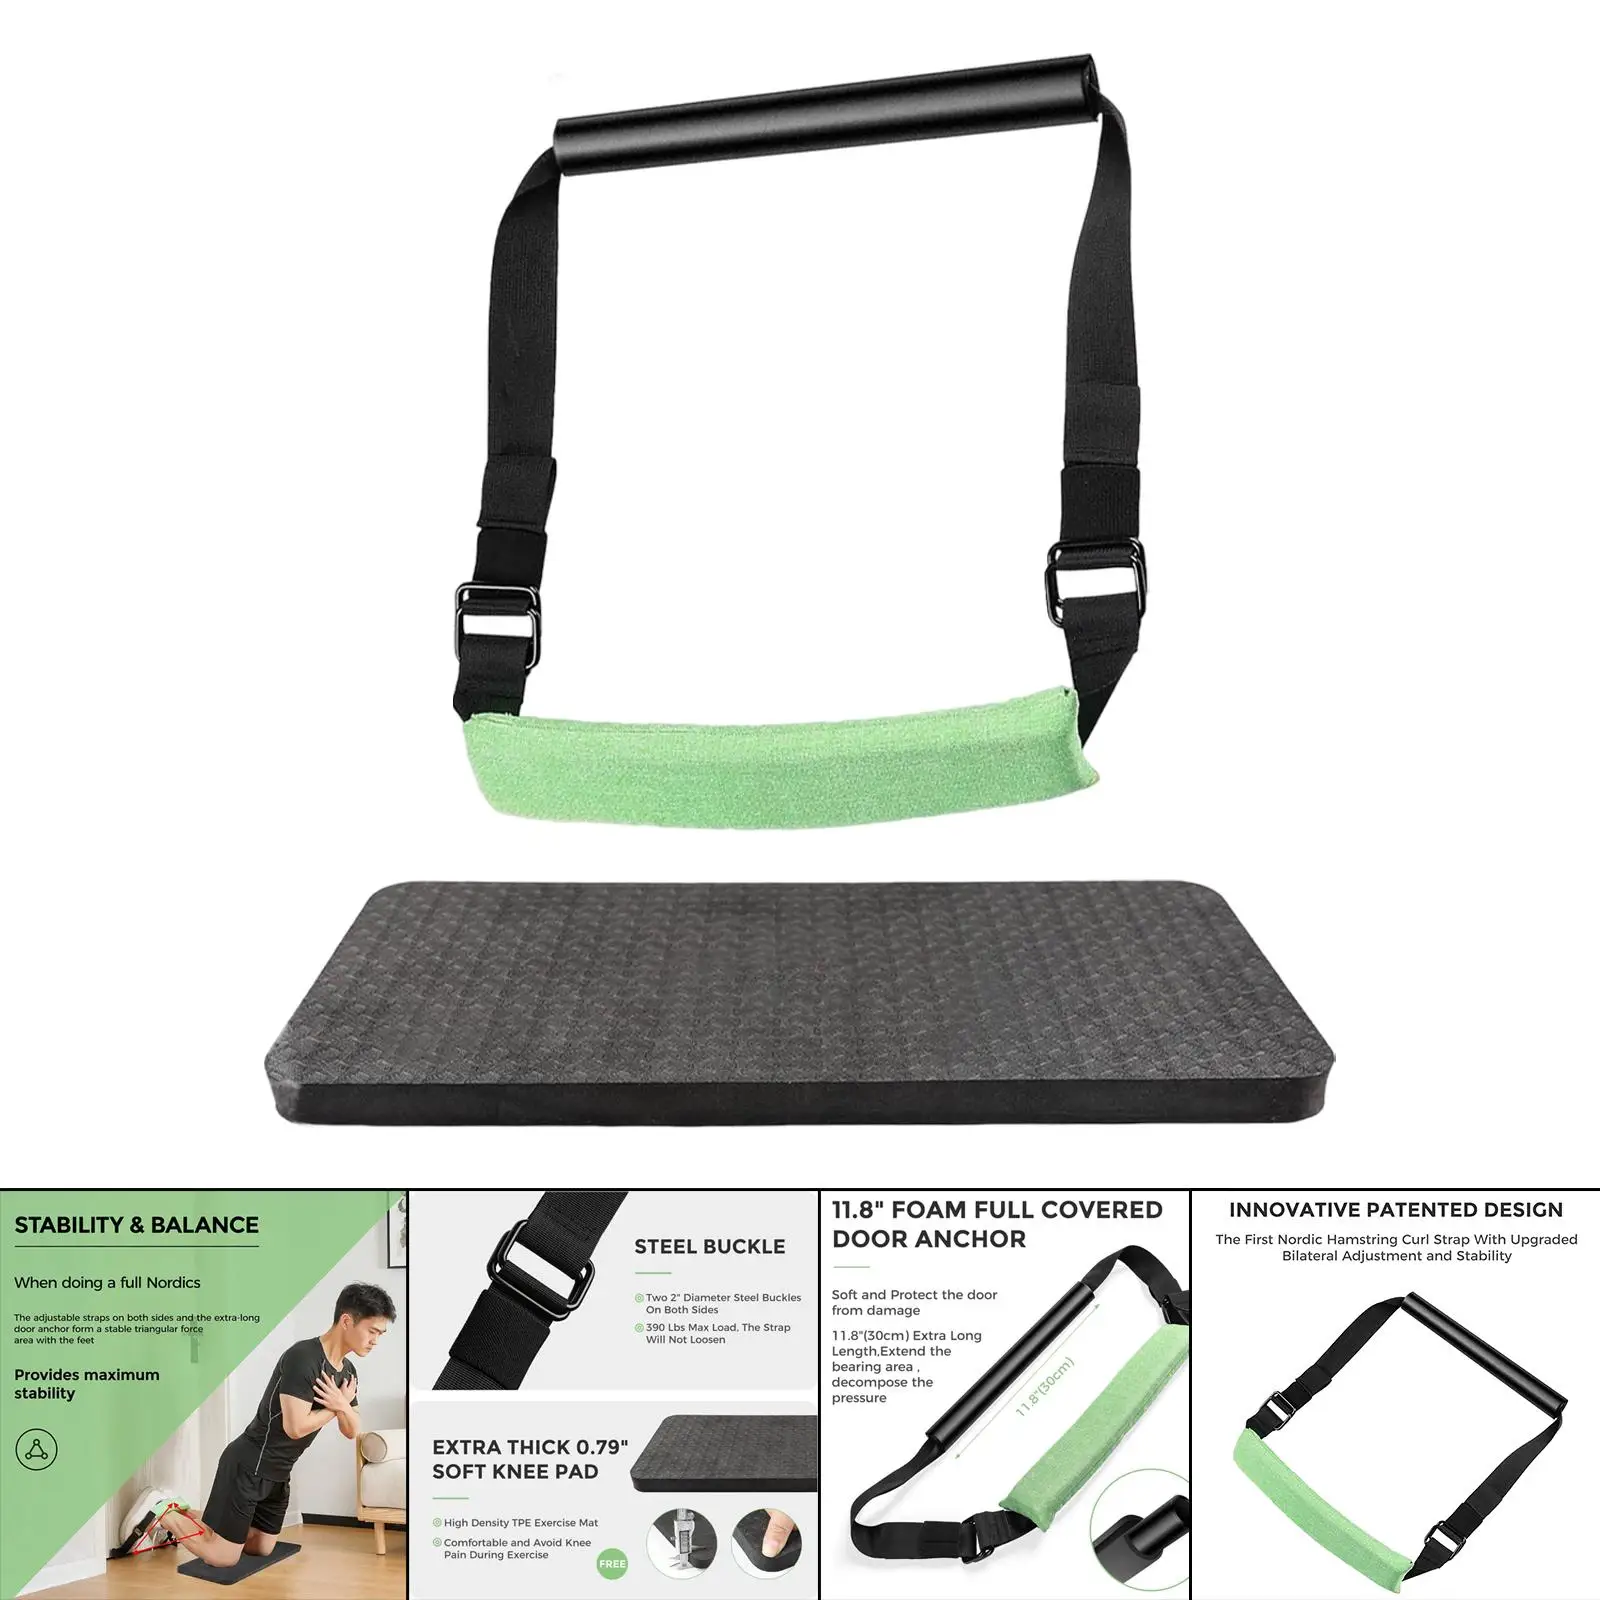 Hamstring Curl Strap Curl Ab Leg Exercise Crunches Door Anchor Abdominal Sit Up Assistant Bar for Home Gym Bodybuilding